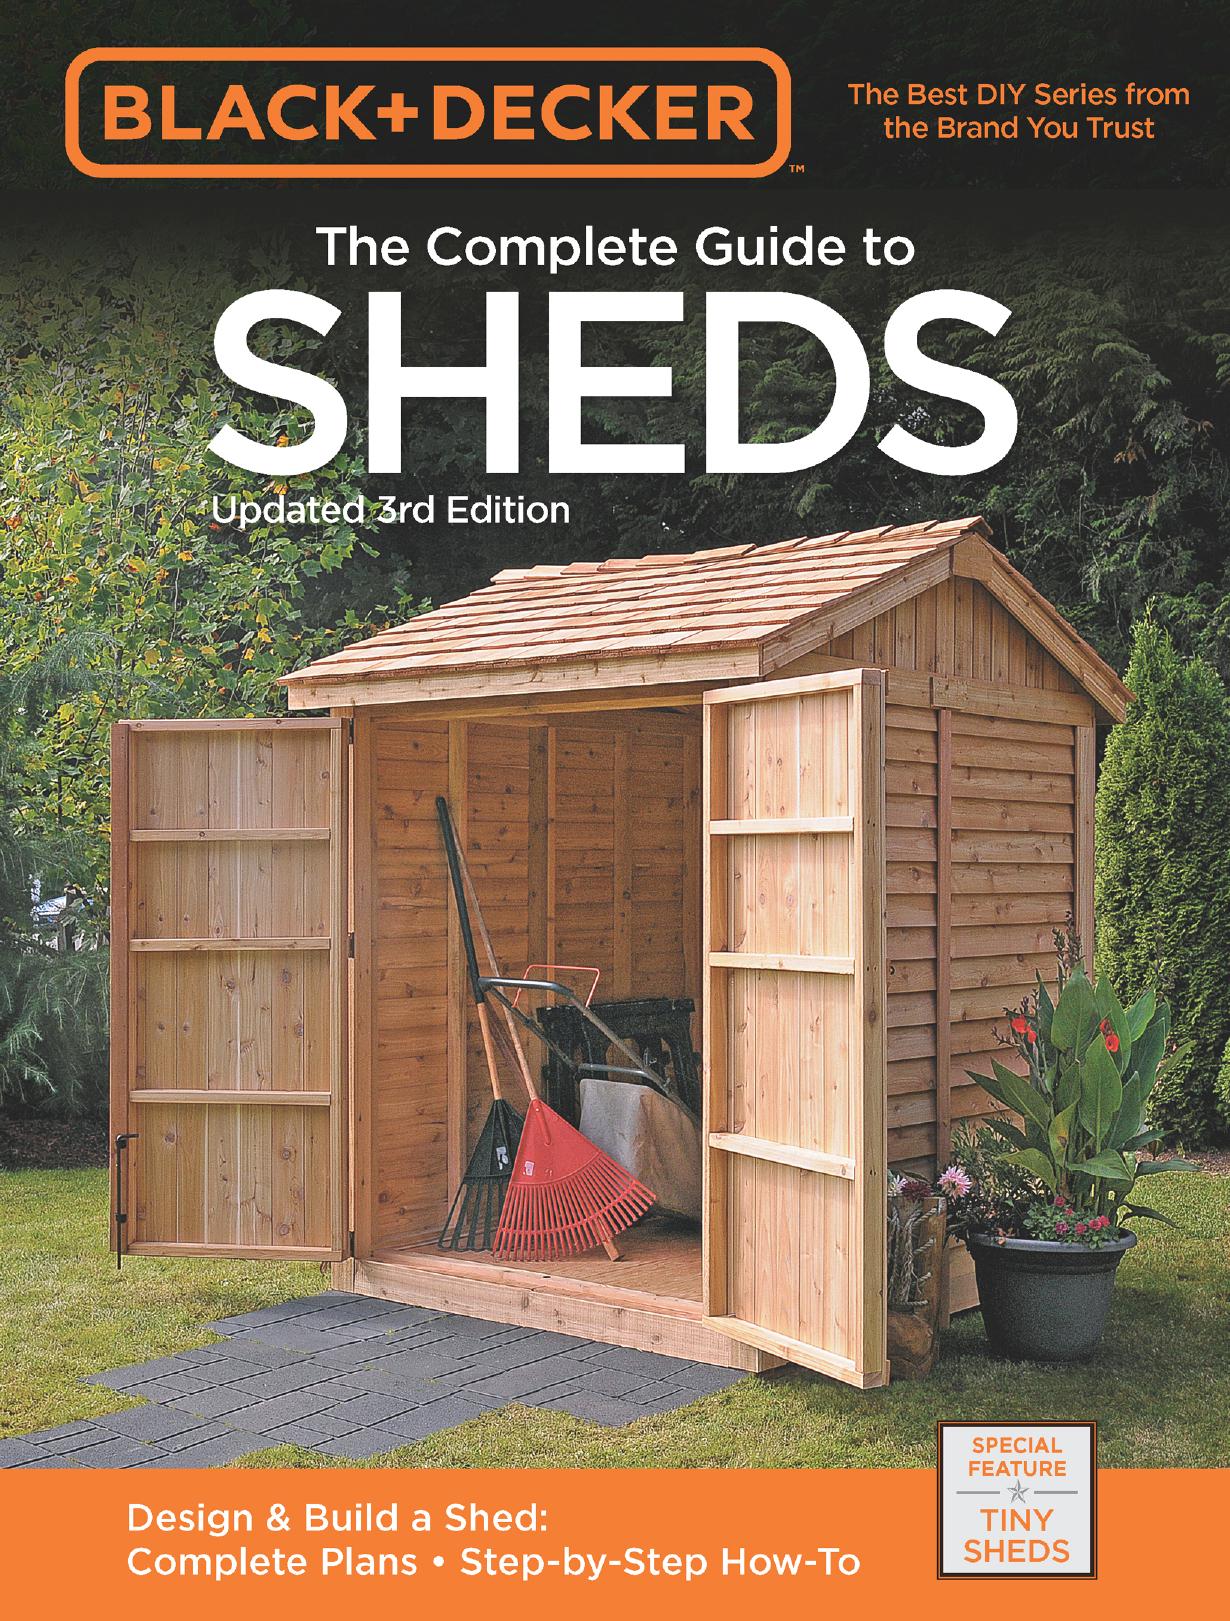 Black & Decker Complete Guide to Sheds 3rd Edition